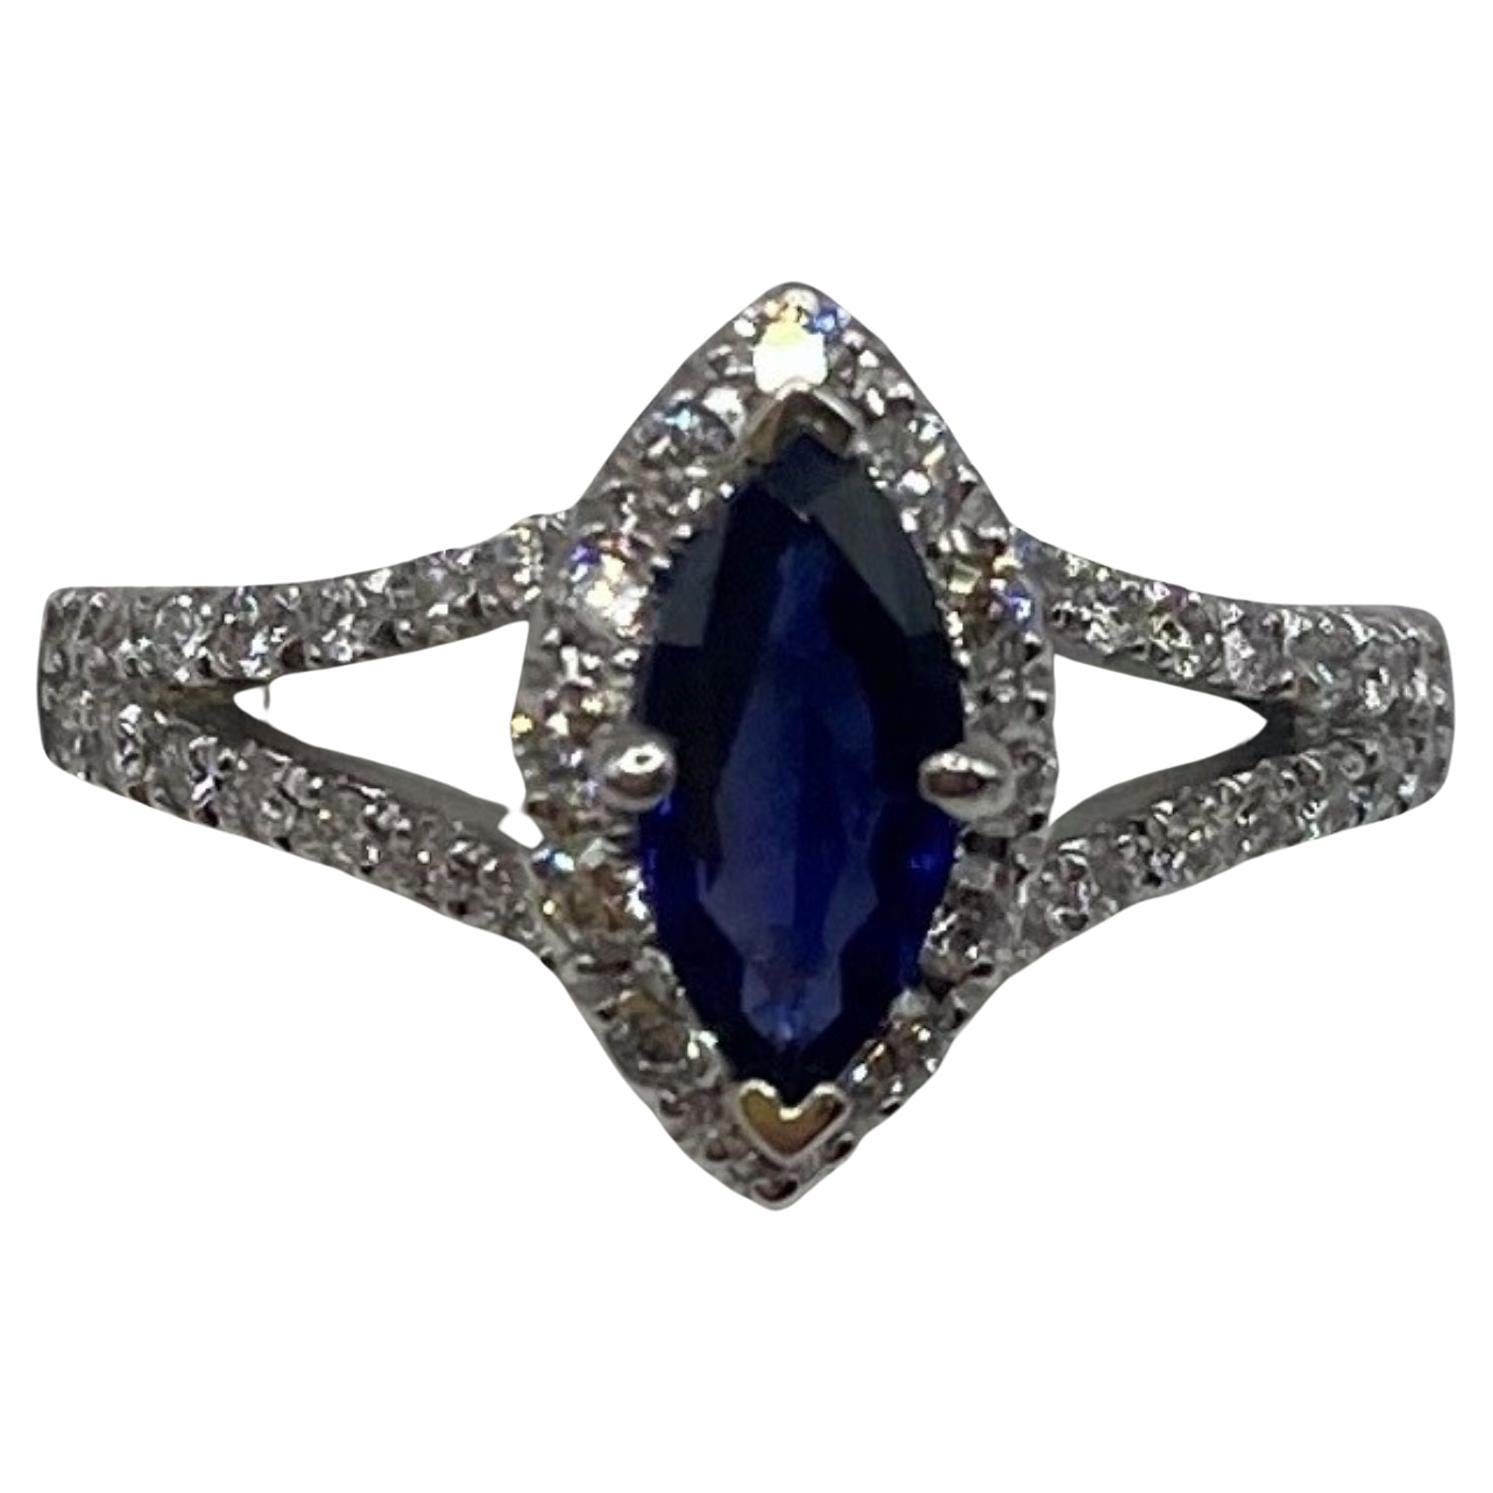 1.23ctw Marquise Sapphire & Round Diamond Ring in 14KT Gold